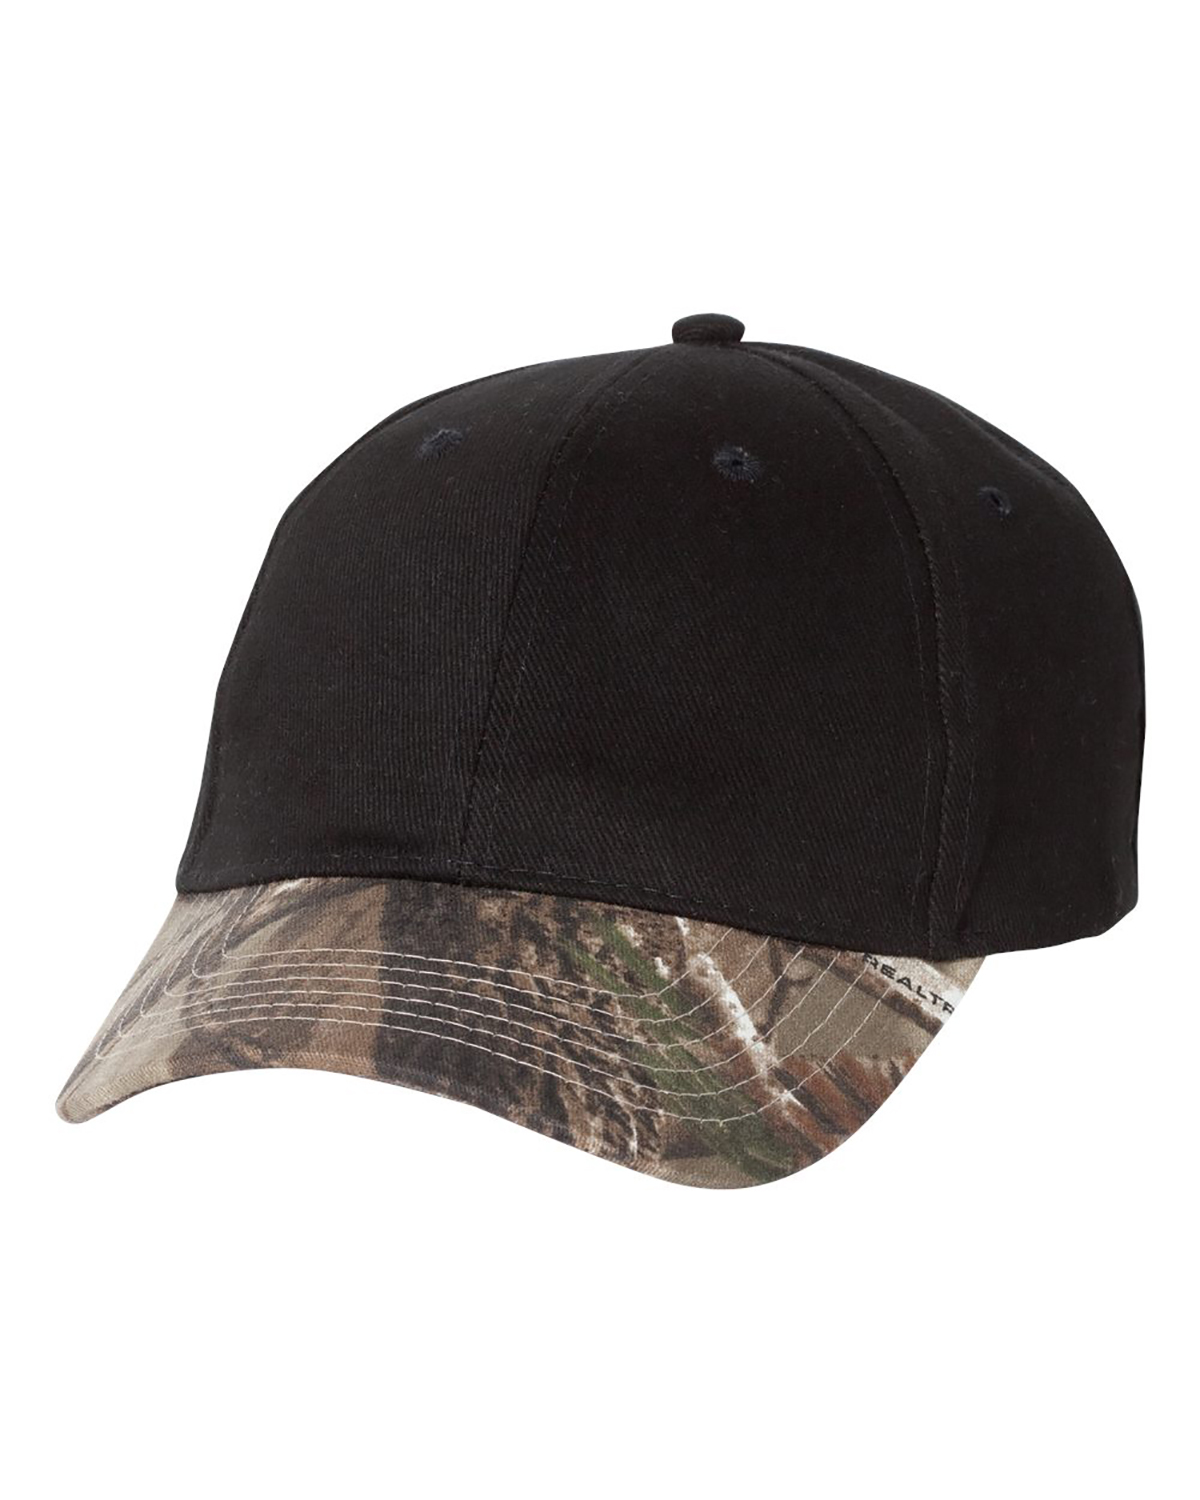 'Kati LC25 Solid Crown Camouflage Cap'